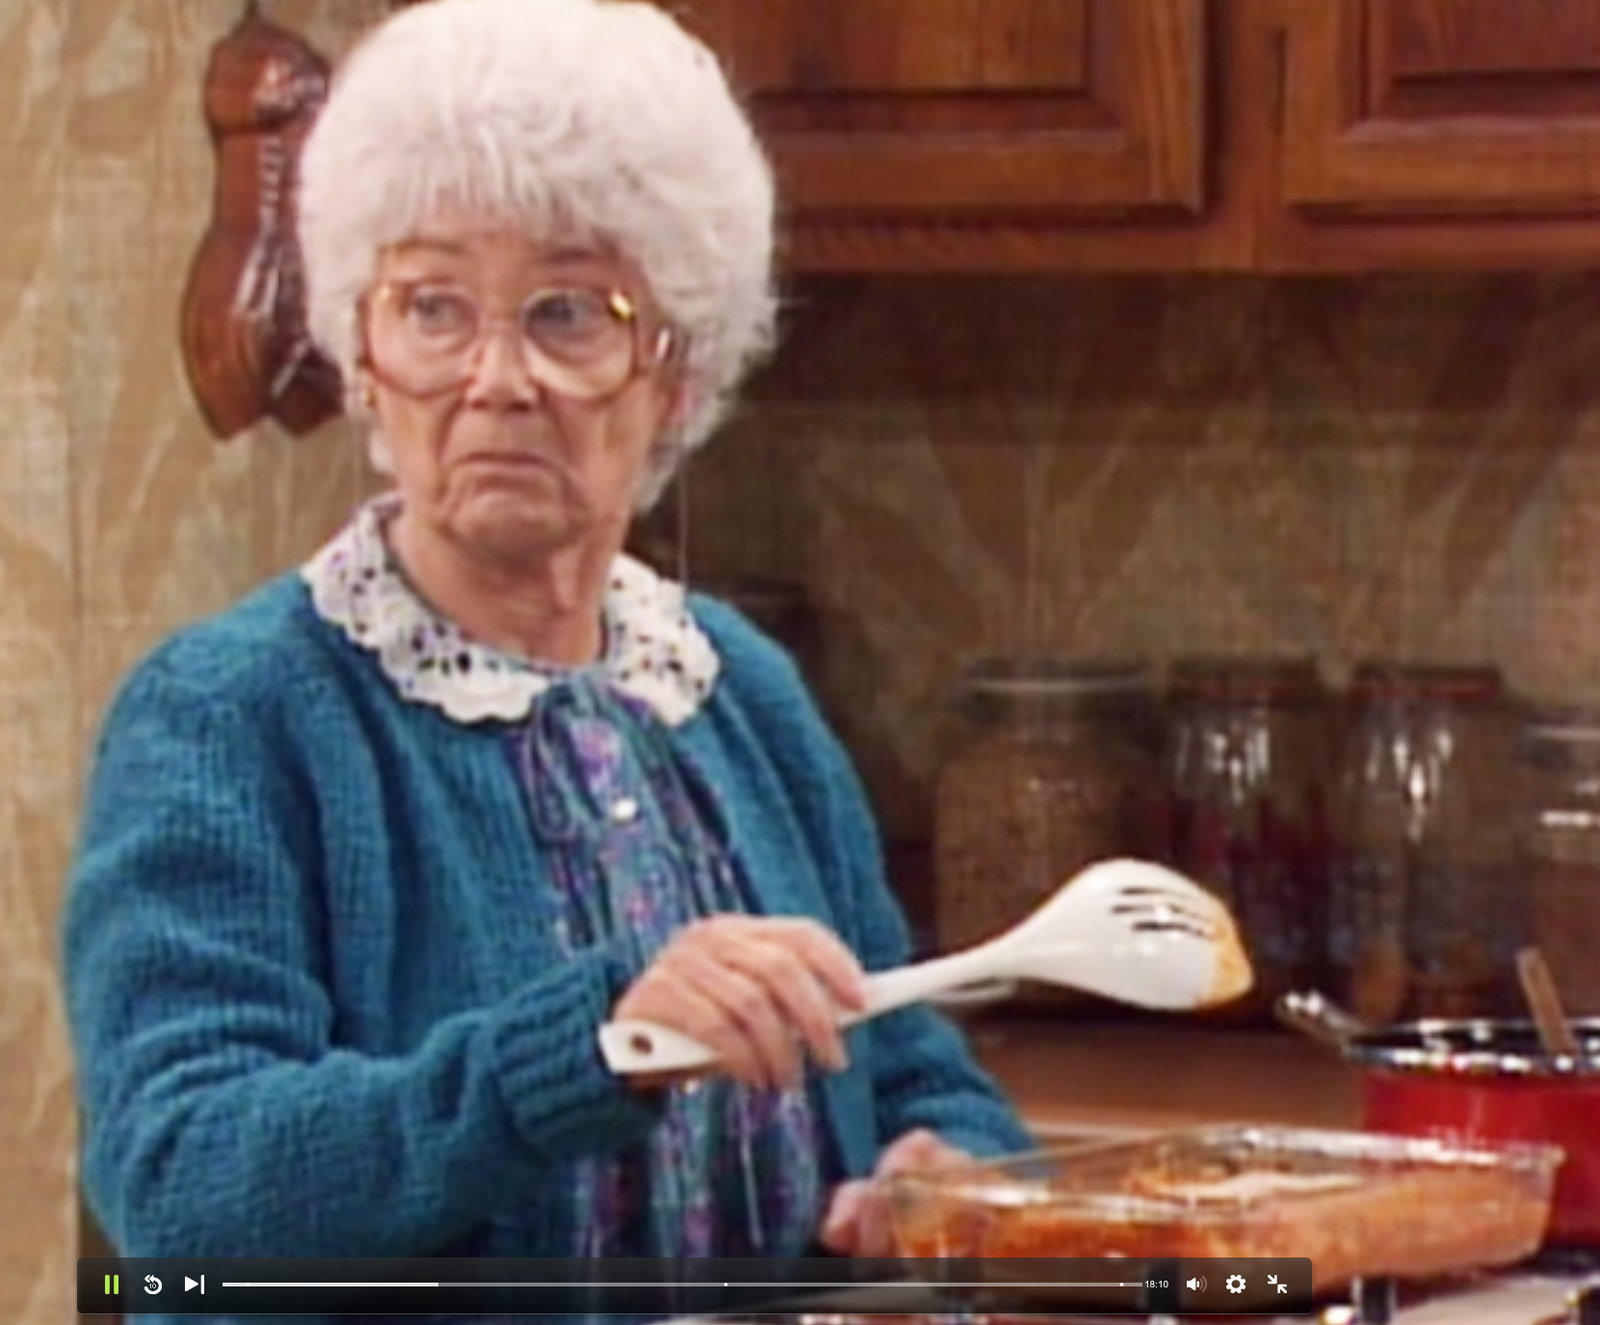 Did 'Golden Girls' Have a 'Penis Cake Pan' in the Kitchen?